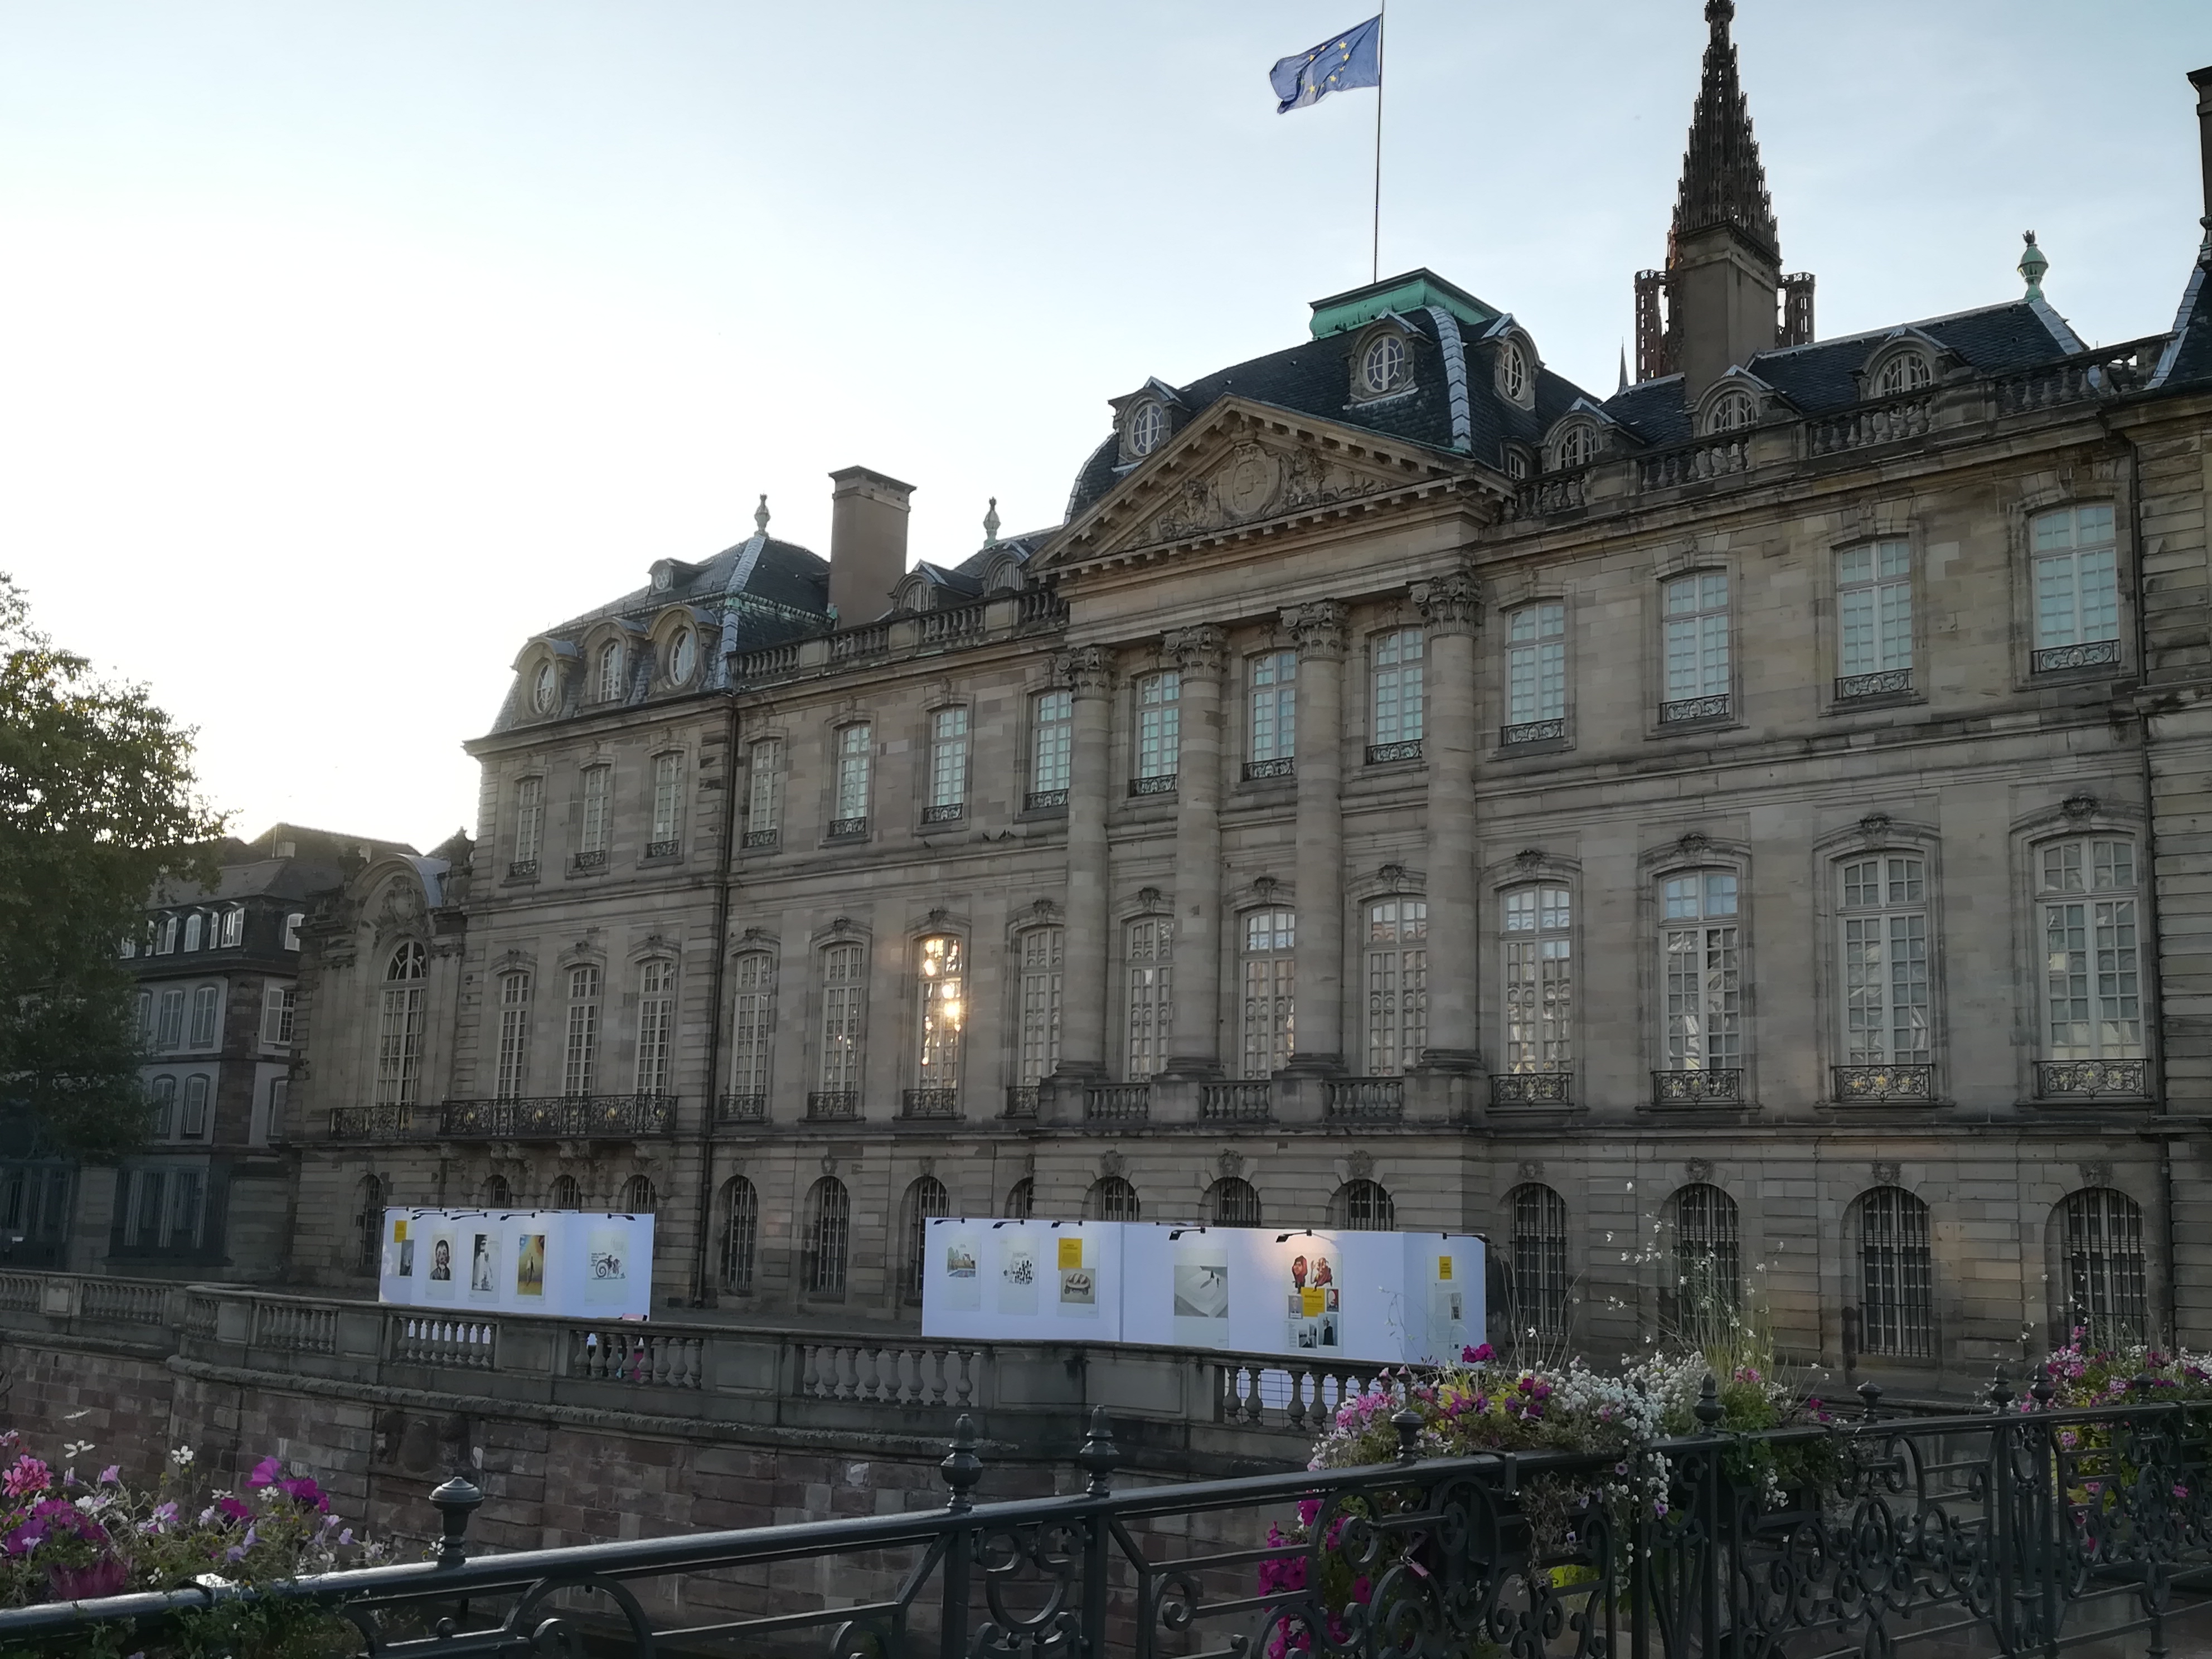 View of the exhibition at the Terrasse du Palais Rohan